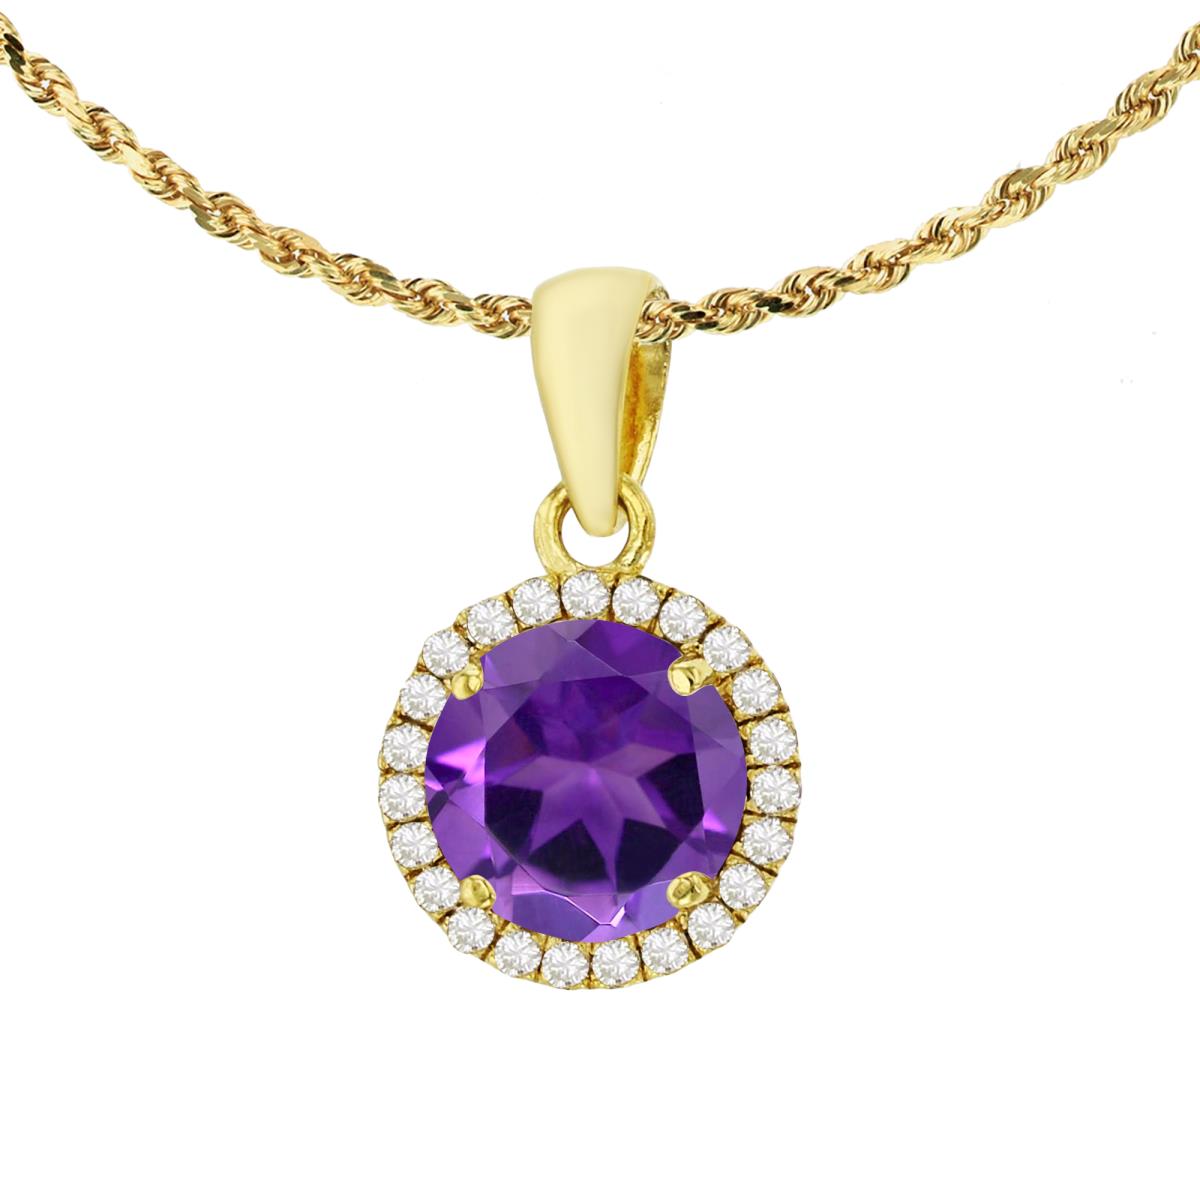 14K Yellow Gold 7mm Round Amethyst & 0.12 CTTW Diamond Halo 18" Rope Chain Necklace